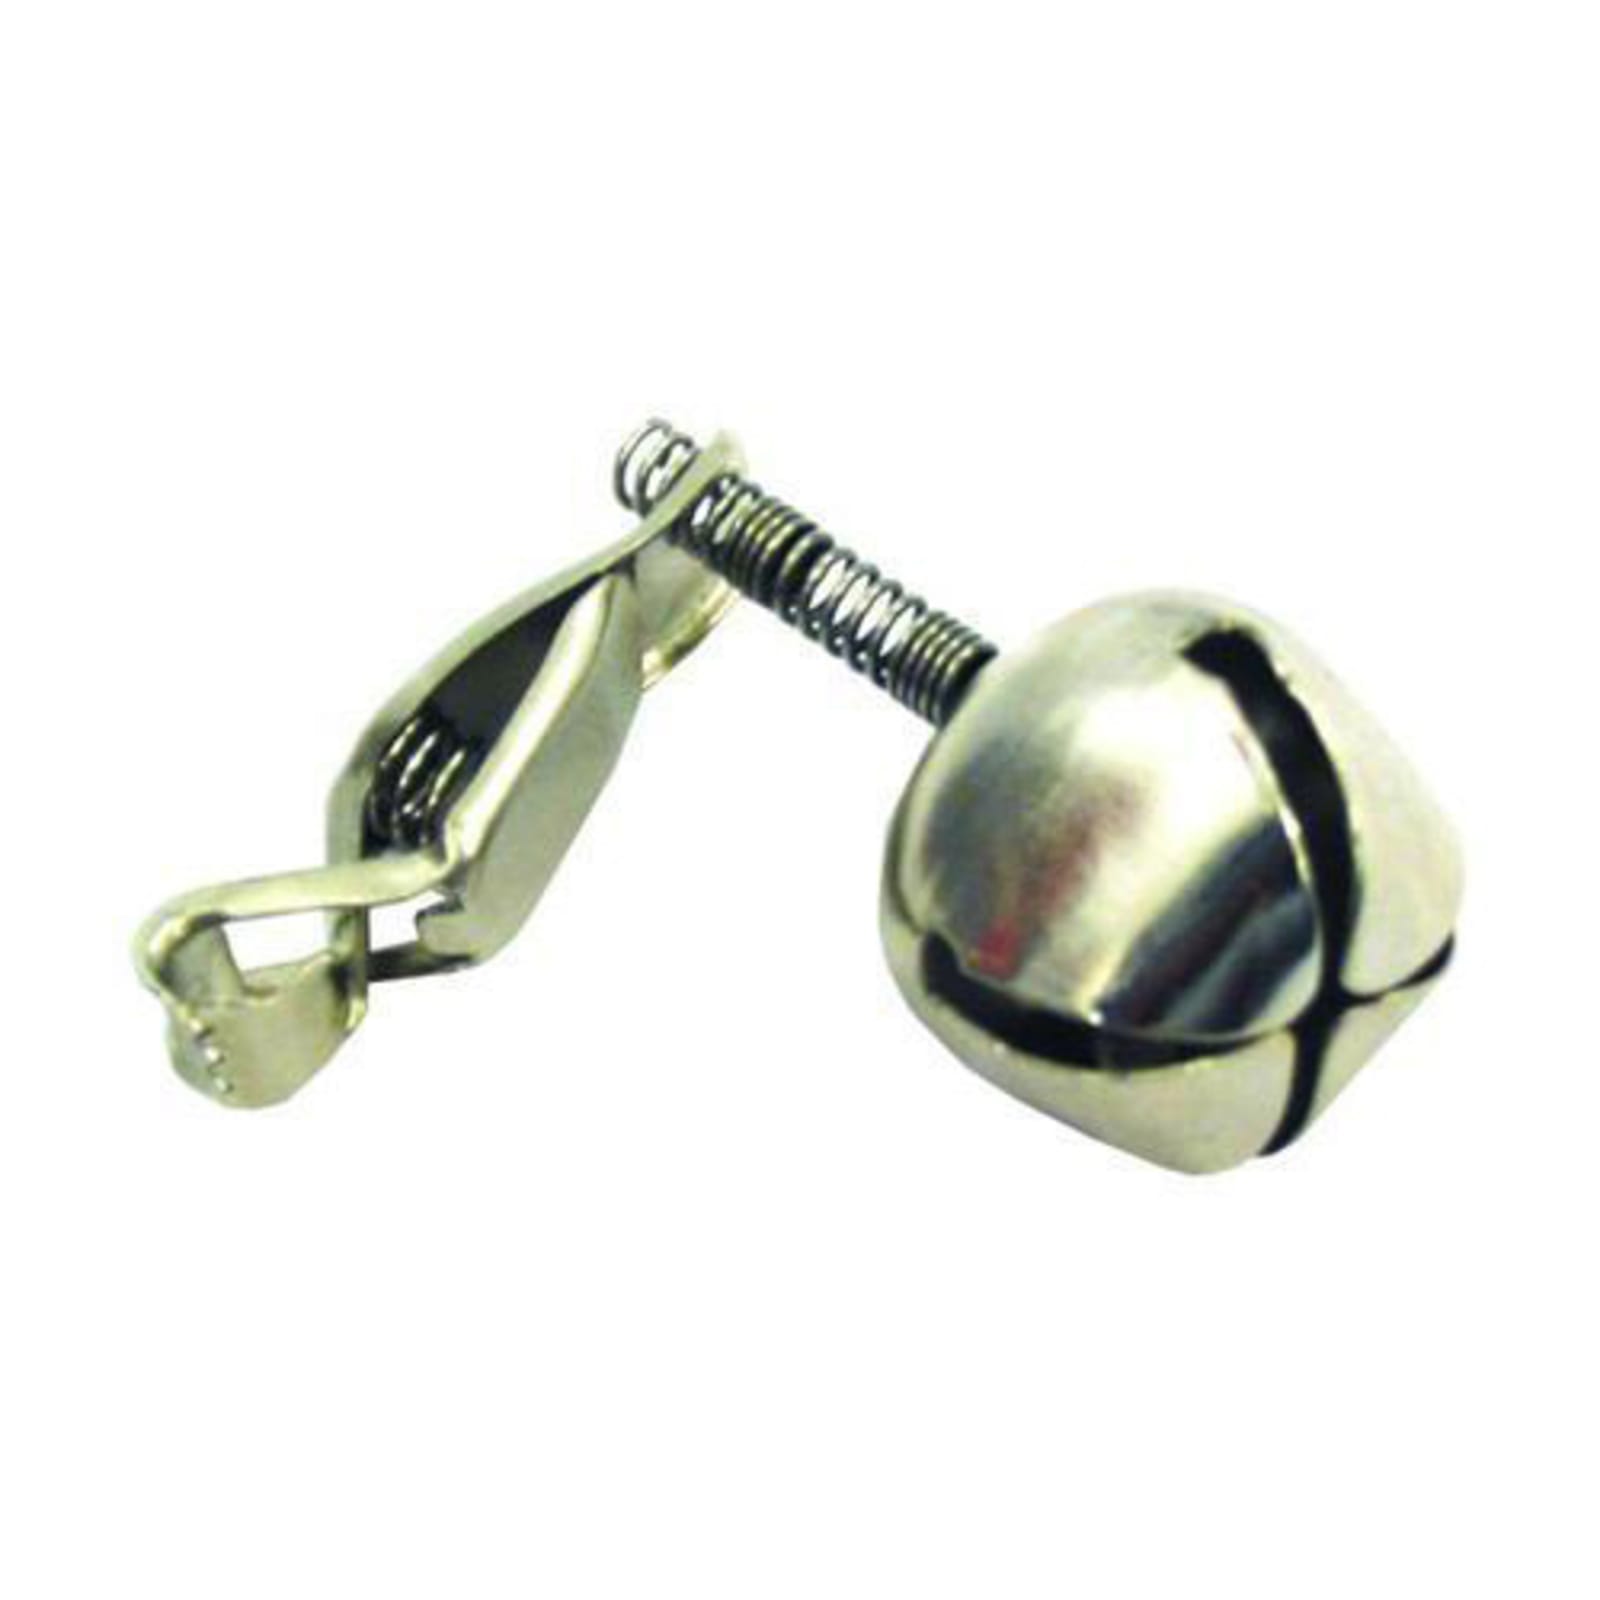 Eagle Claw Stainless Fishing Bell by Eagle Claw at Fleet Farm